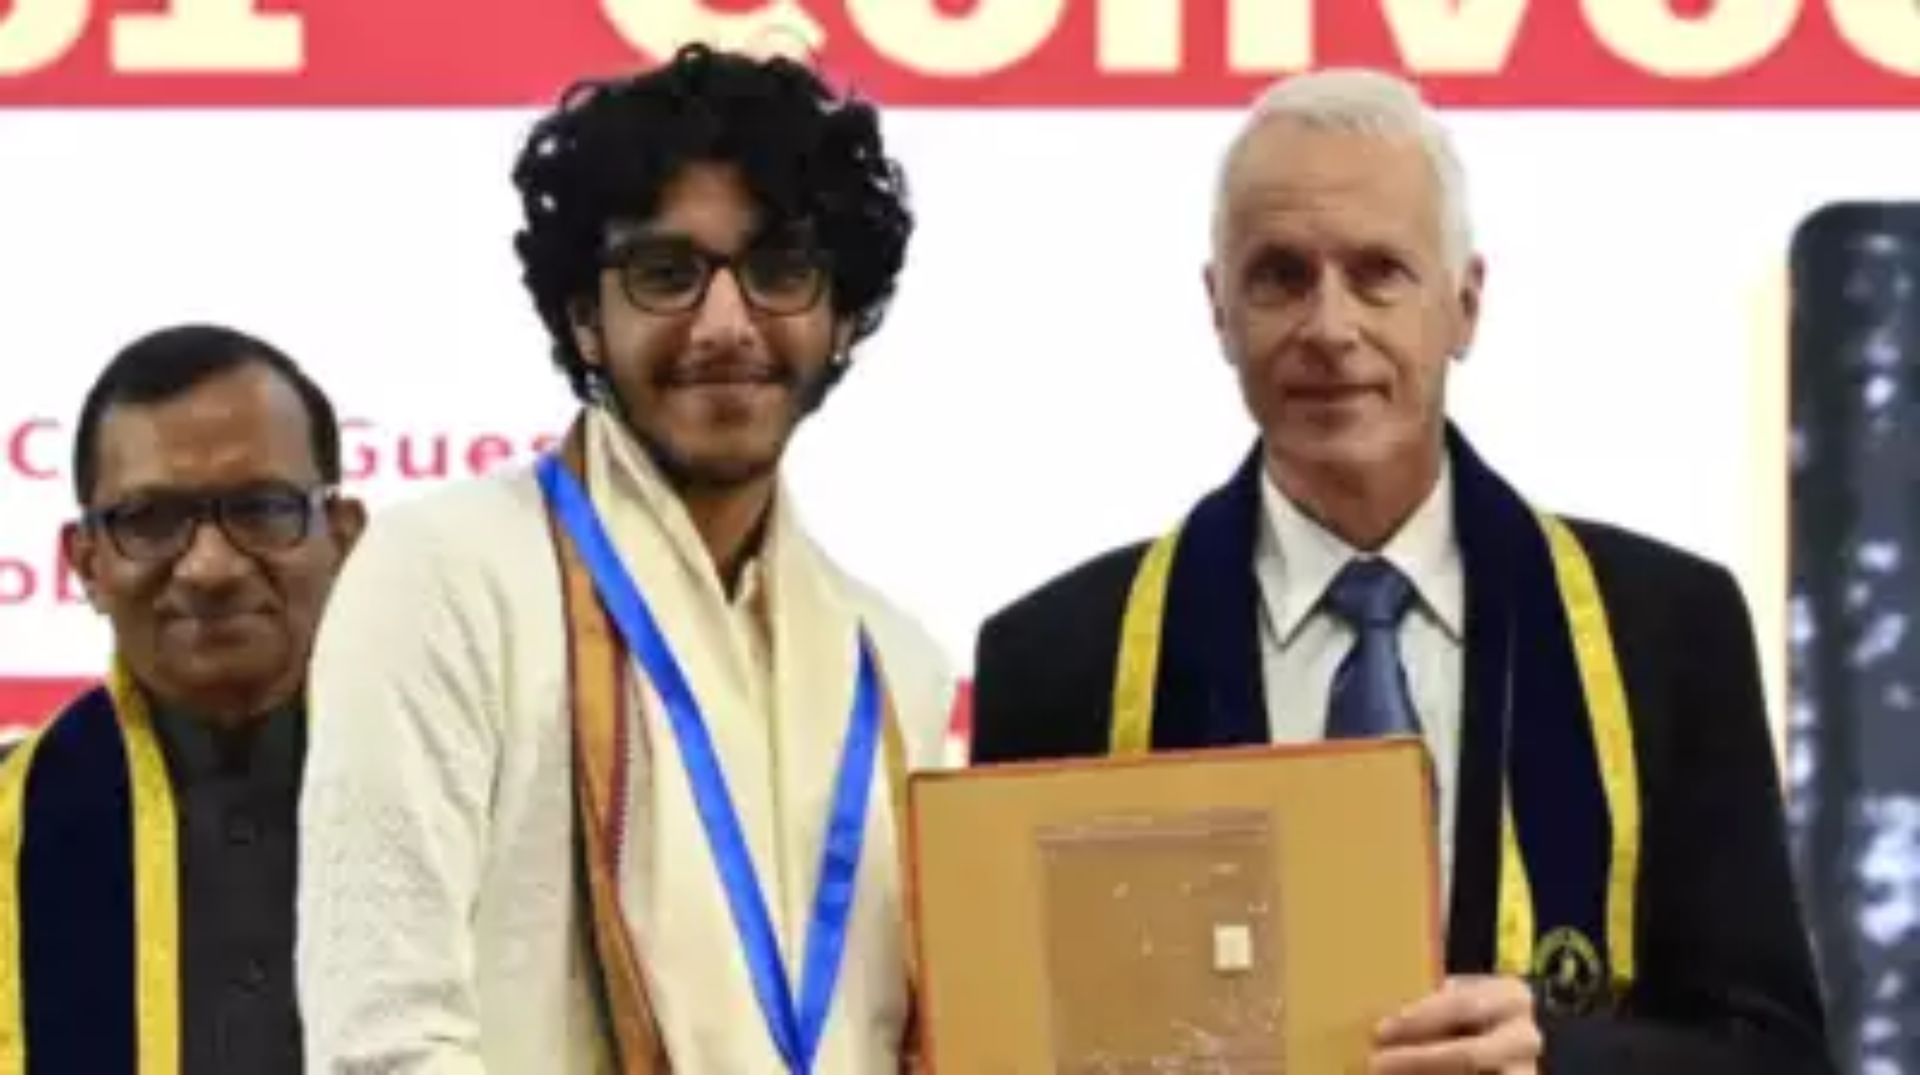 IIT-Madras Prize Winner Calls Out ‘Mass Genocide’ in Palestine and Tech Giants’ Role at Convocation